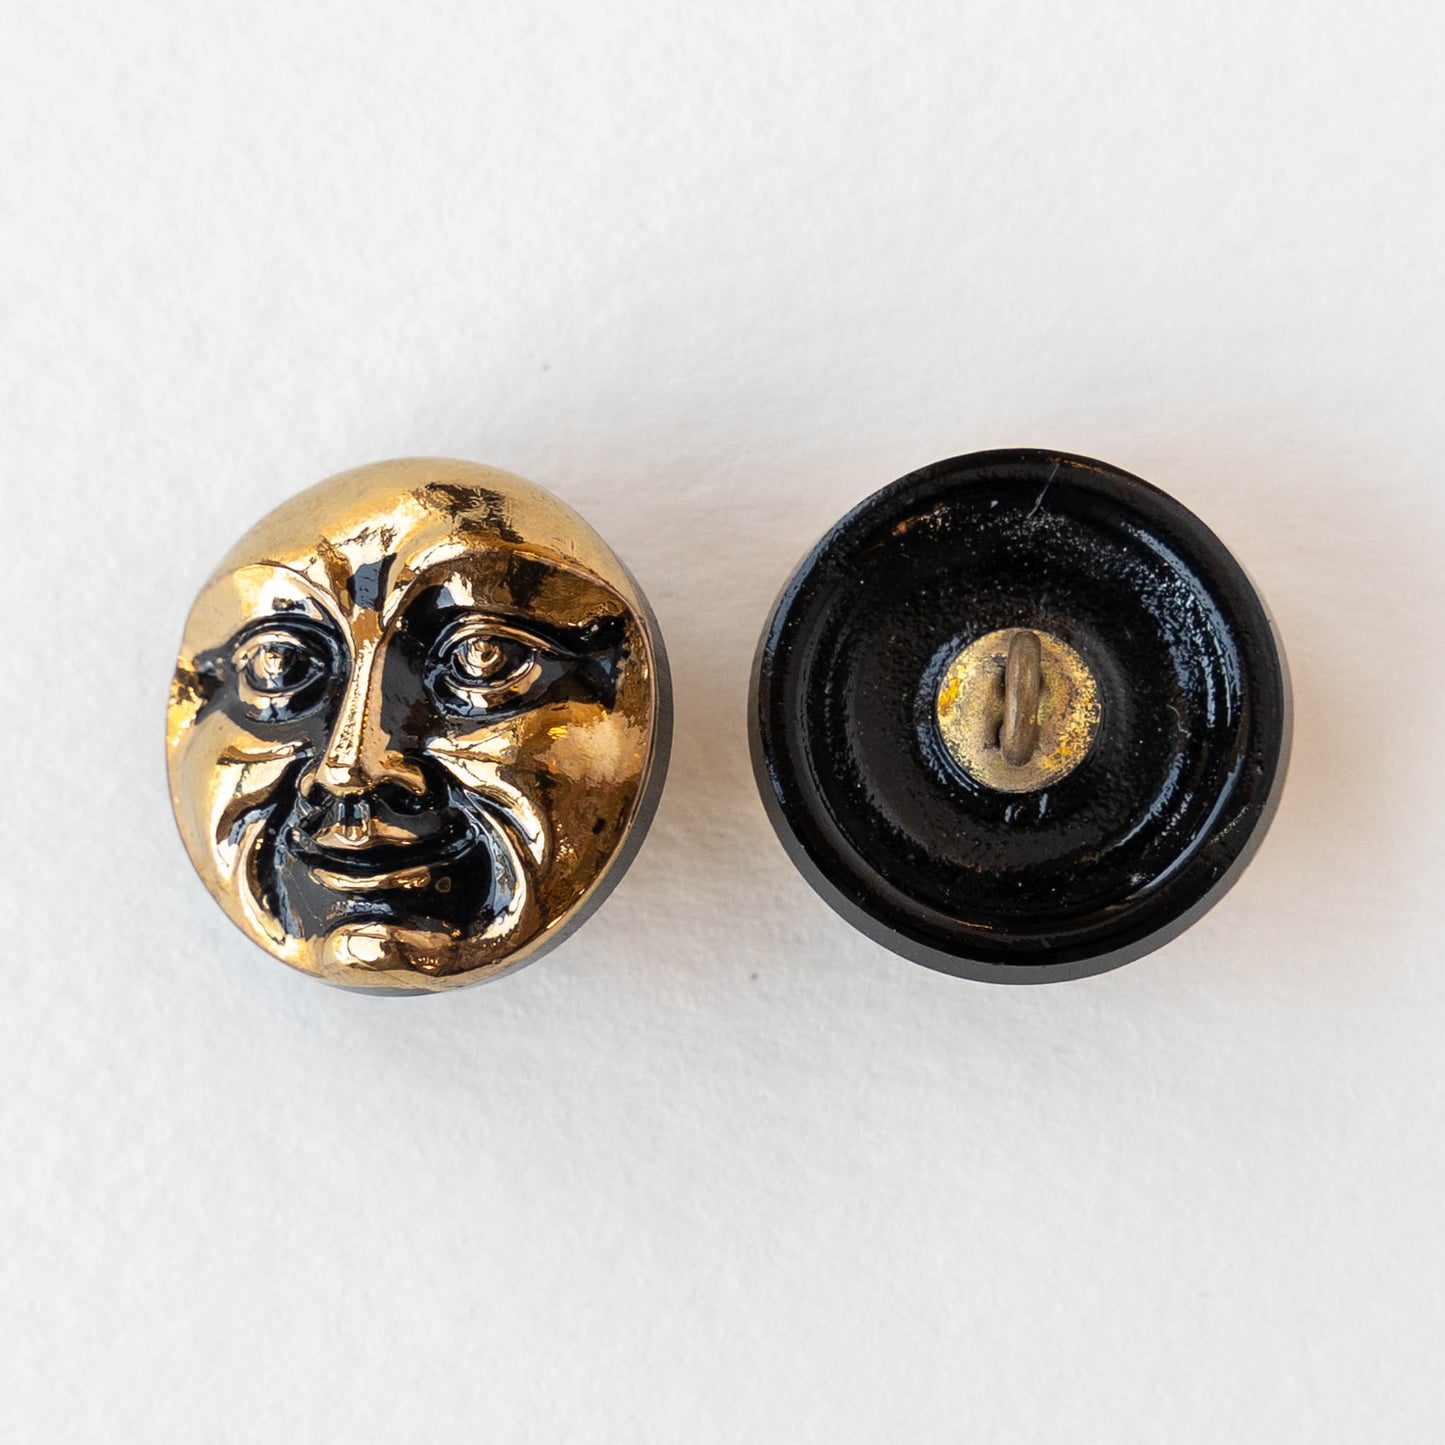 18mm Moon Face Buttons - Metallic Gold with Black Wash  - 1 Button